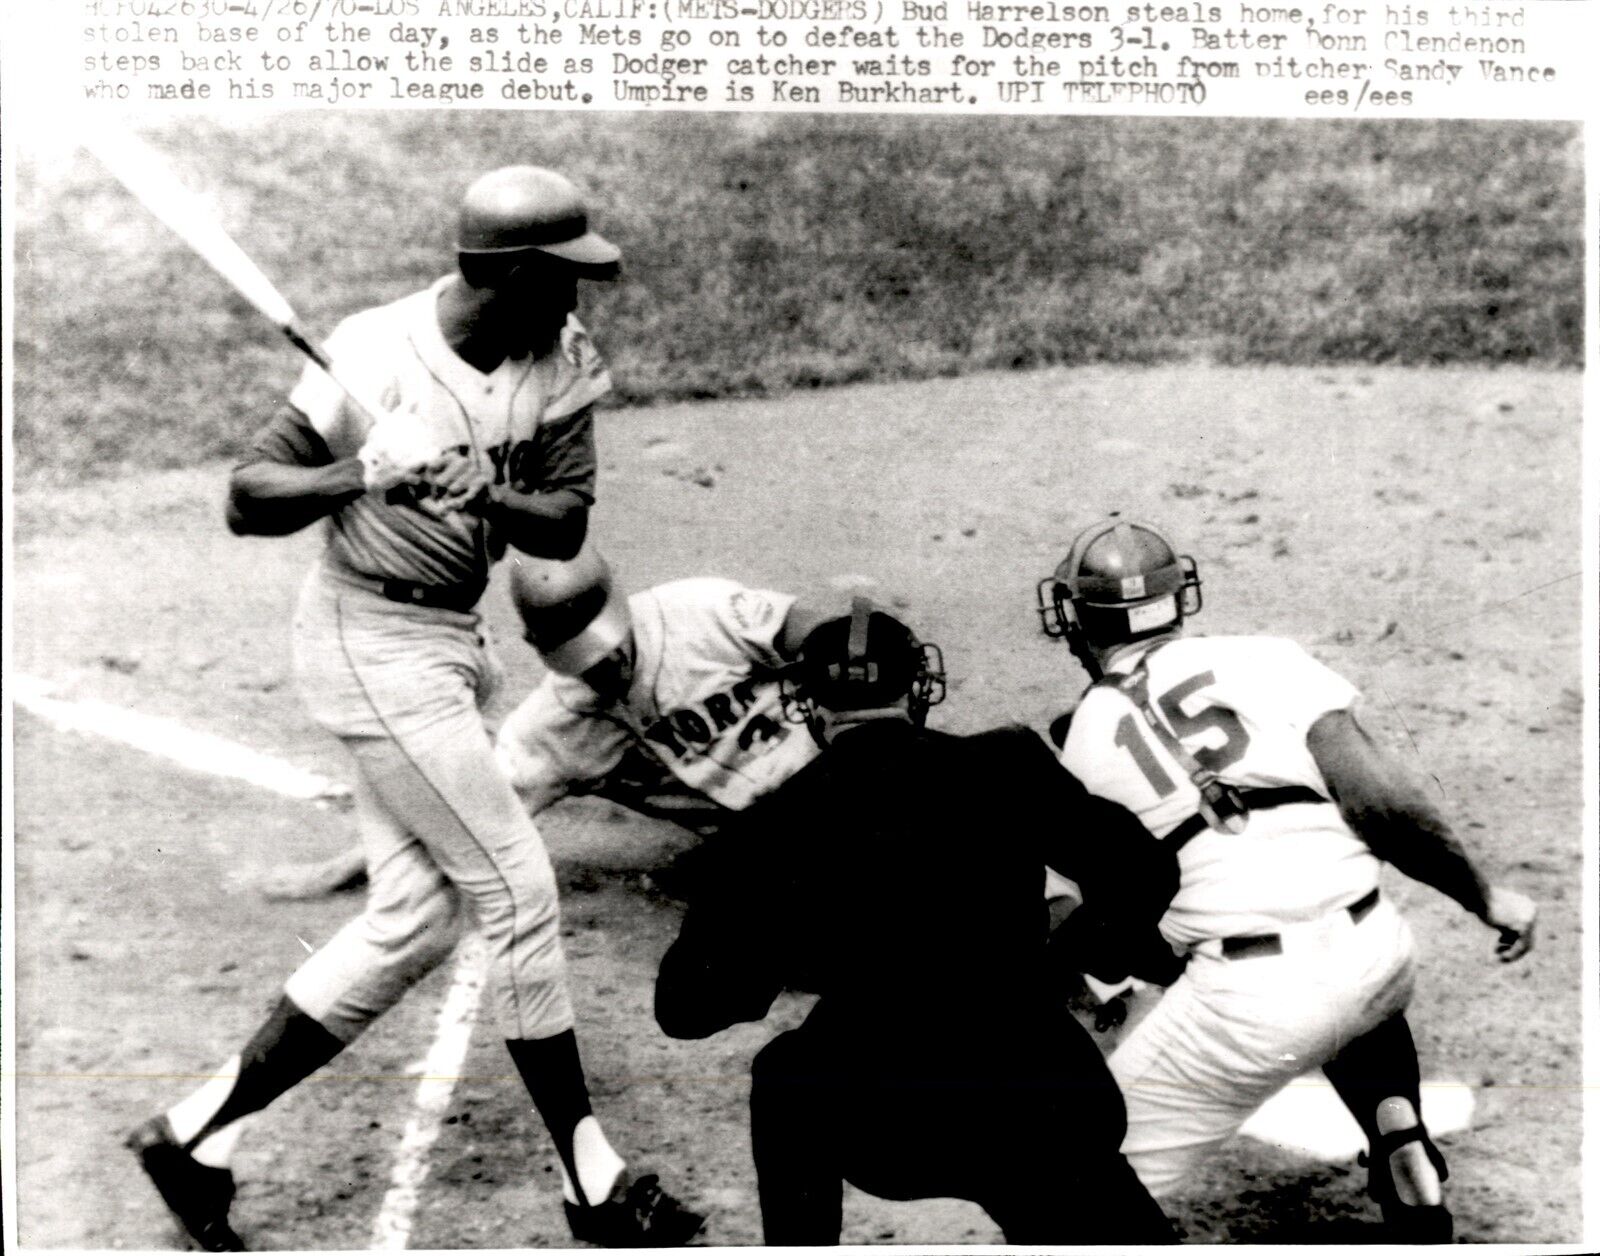 LG34 1970 Wire Photo NY METS BUD HARRELSON STEALS HOME vs LOS ANGELES DODGERS